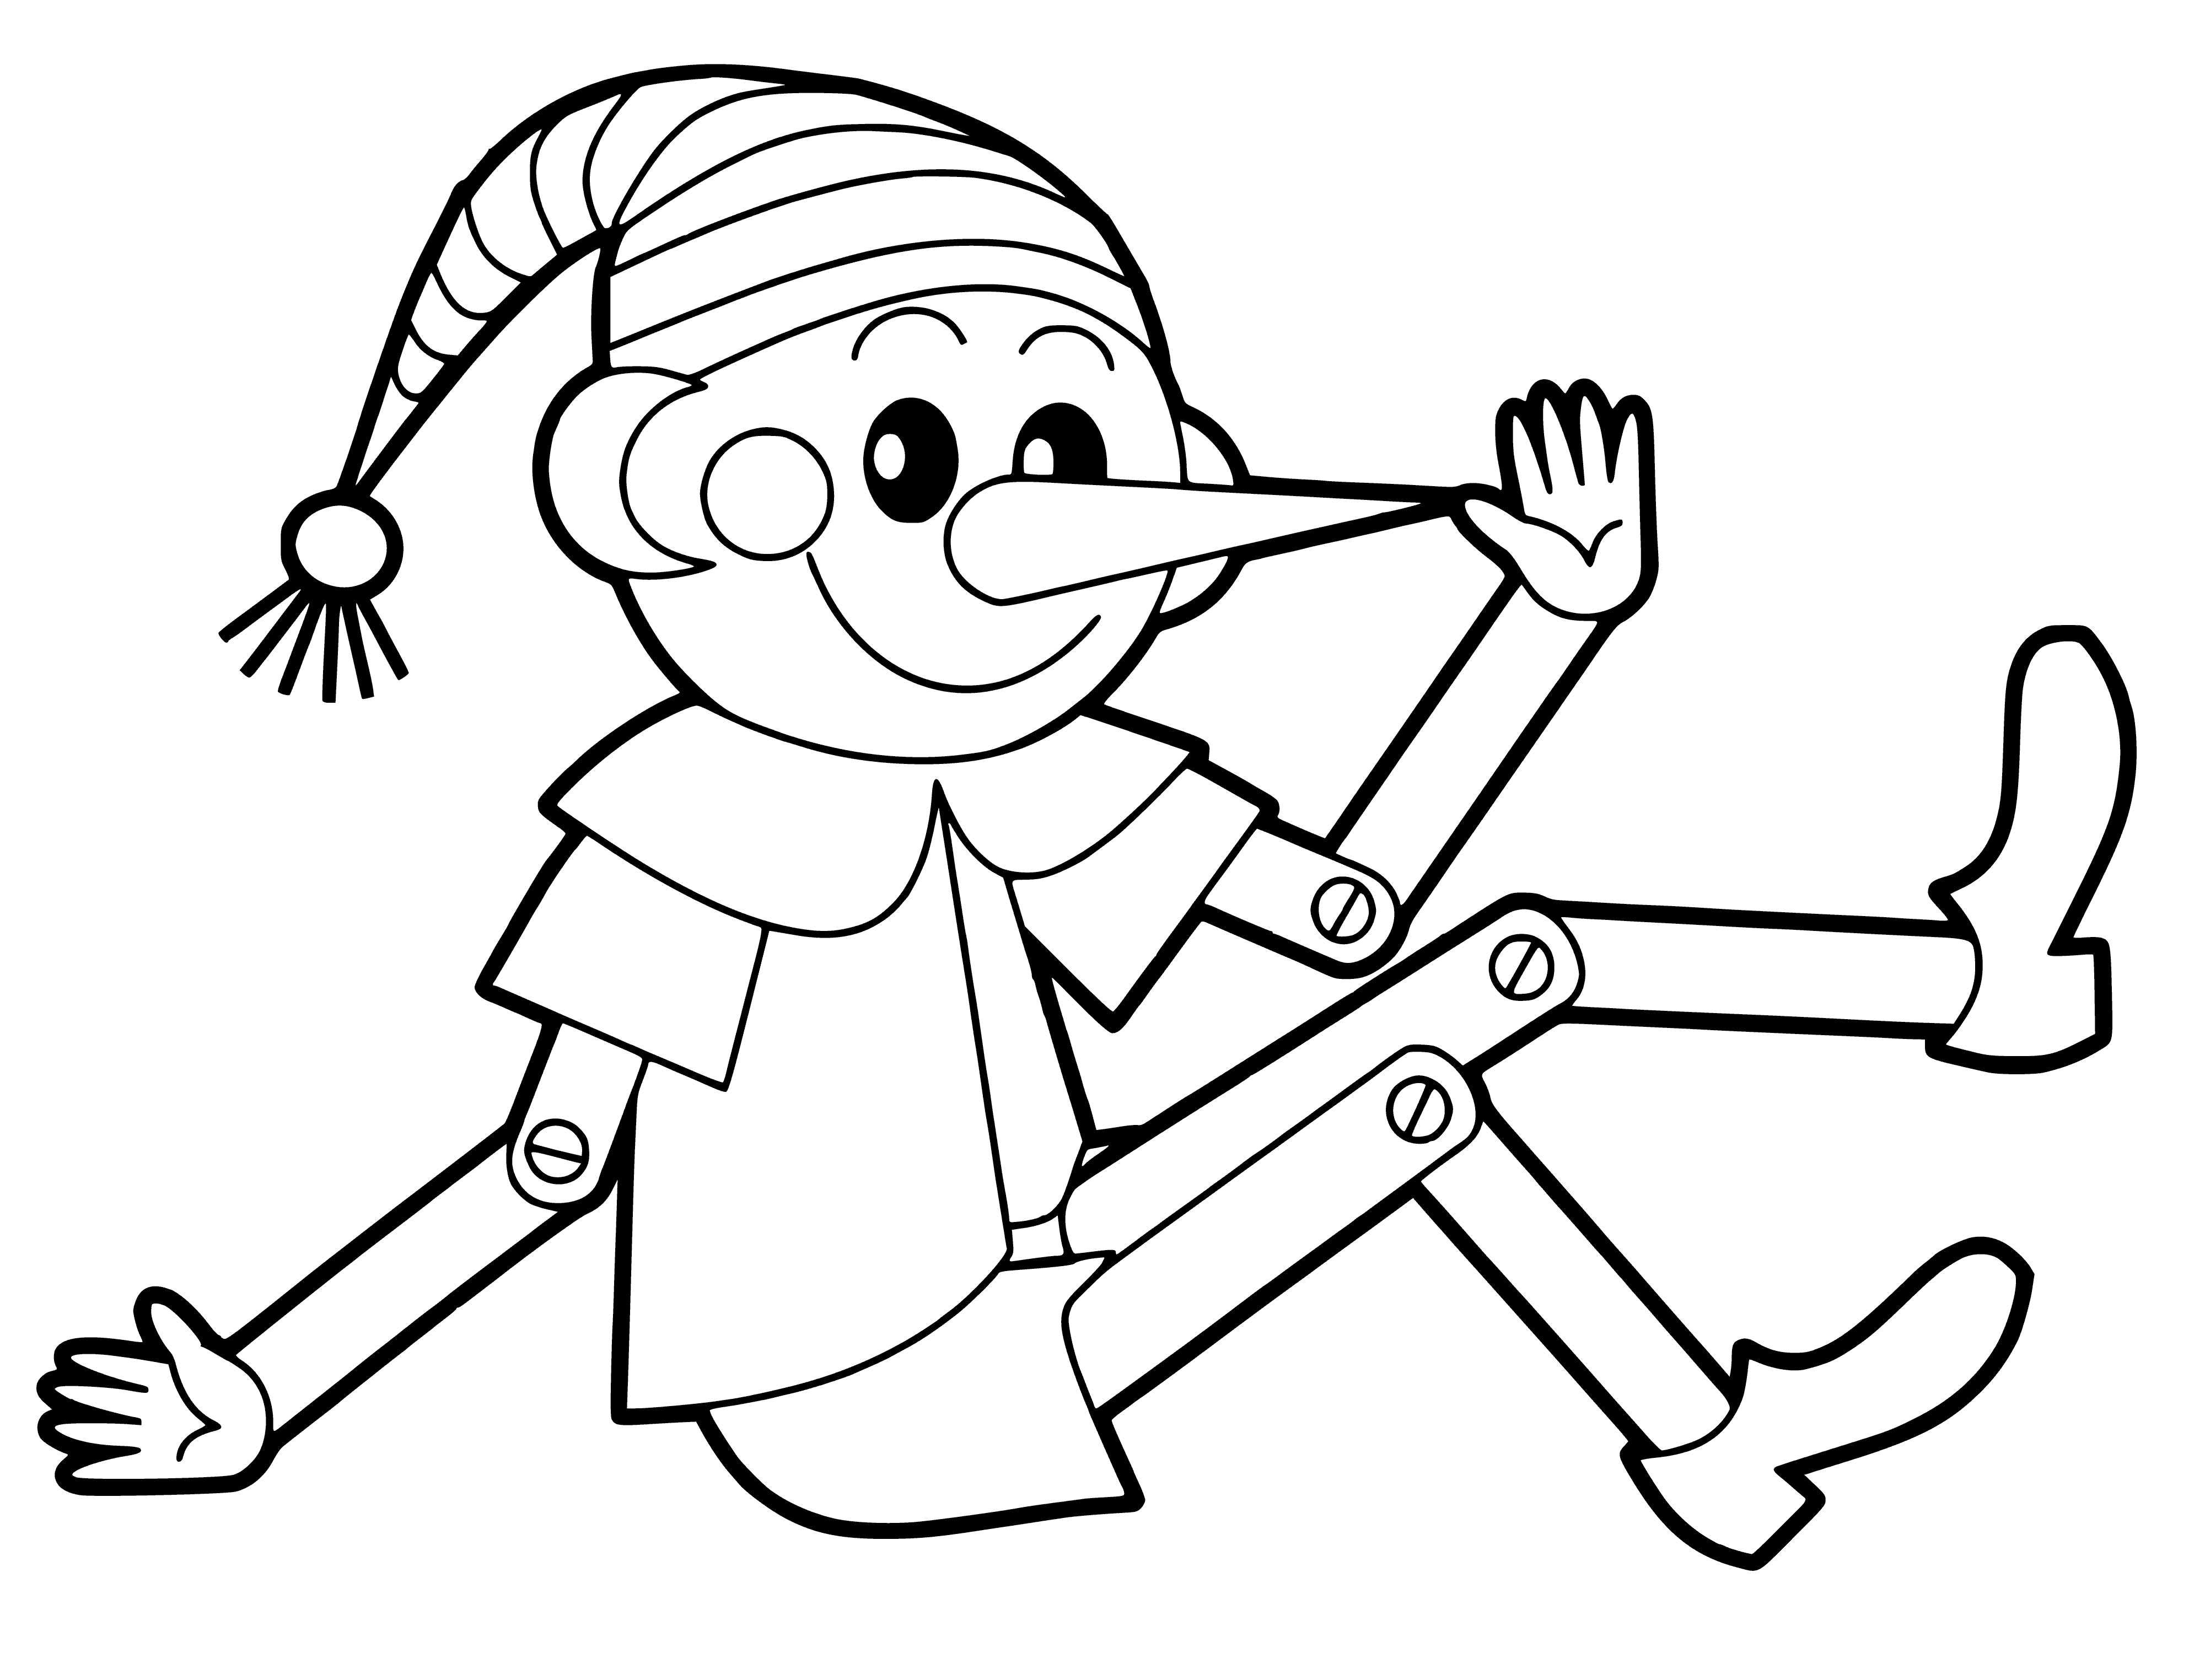 coloring page: Pinocchio is a wooden puppet who comes to life & goes on adventures to learn to be a good boy. In this coloring page, he plays happily with children.